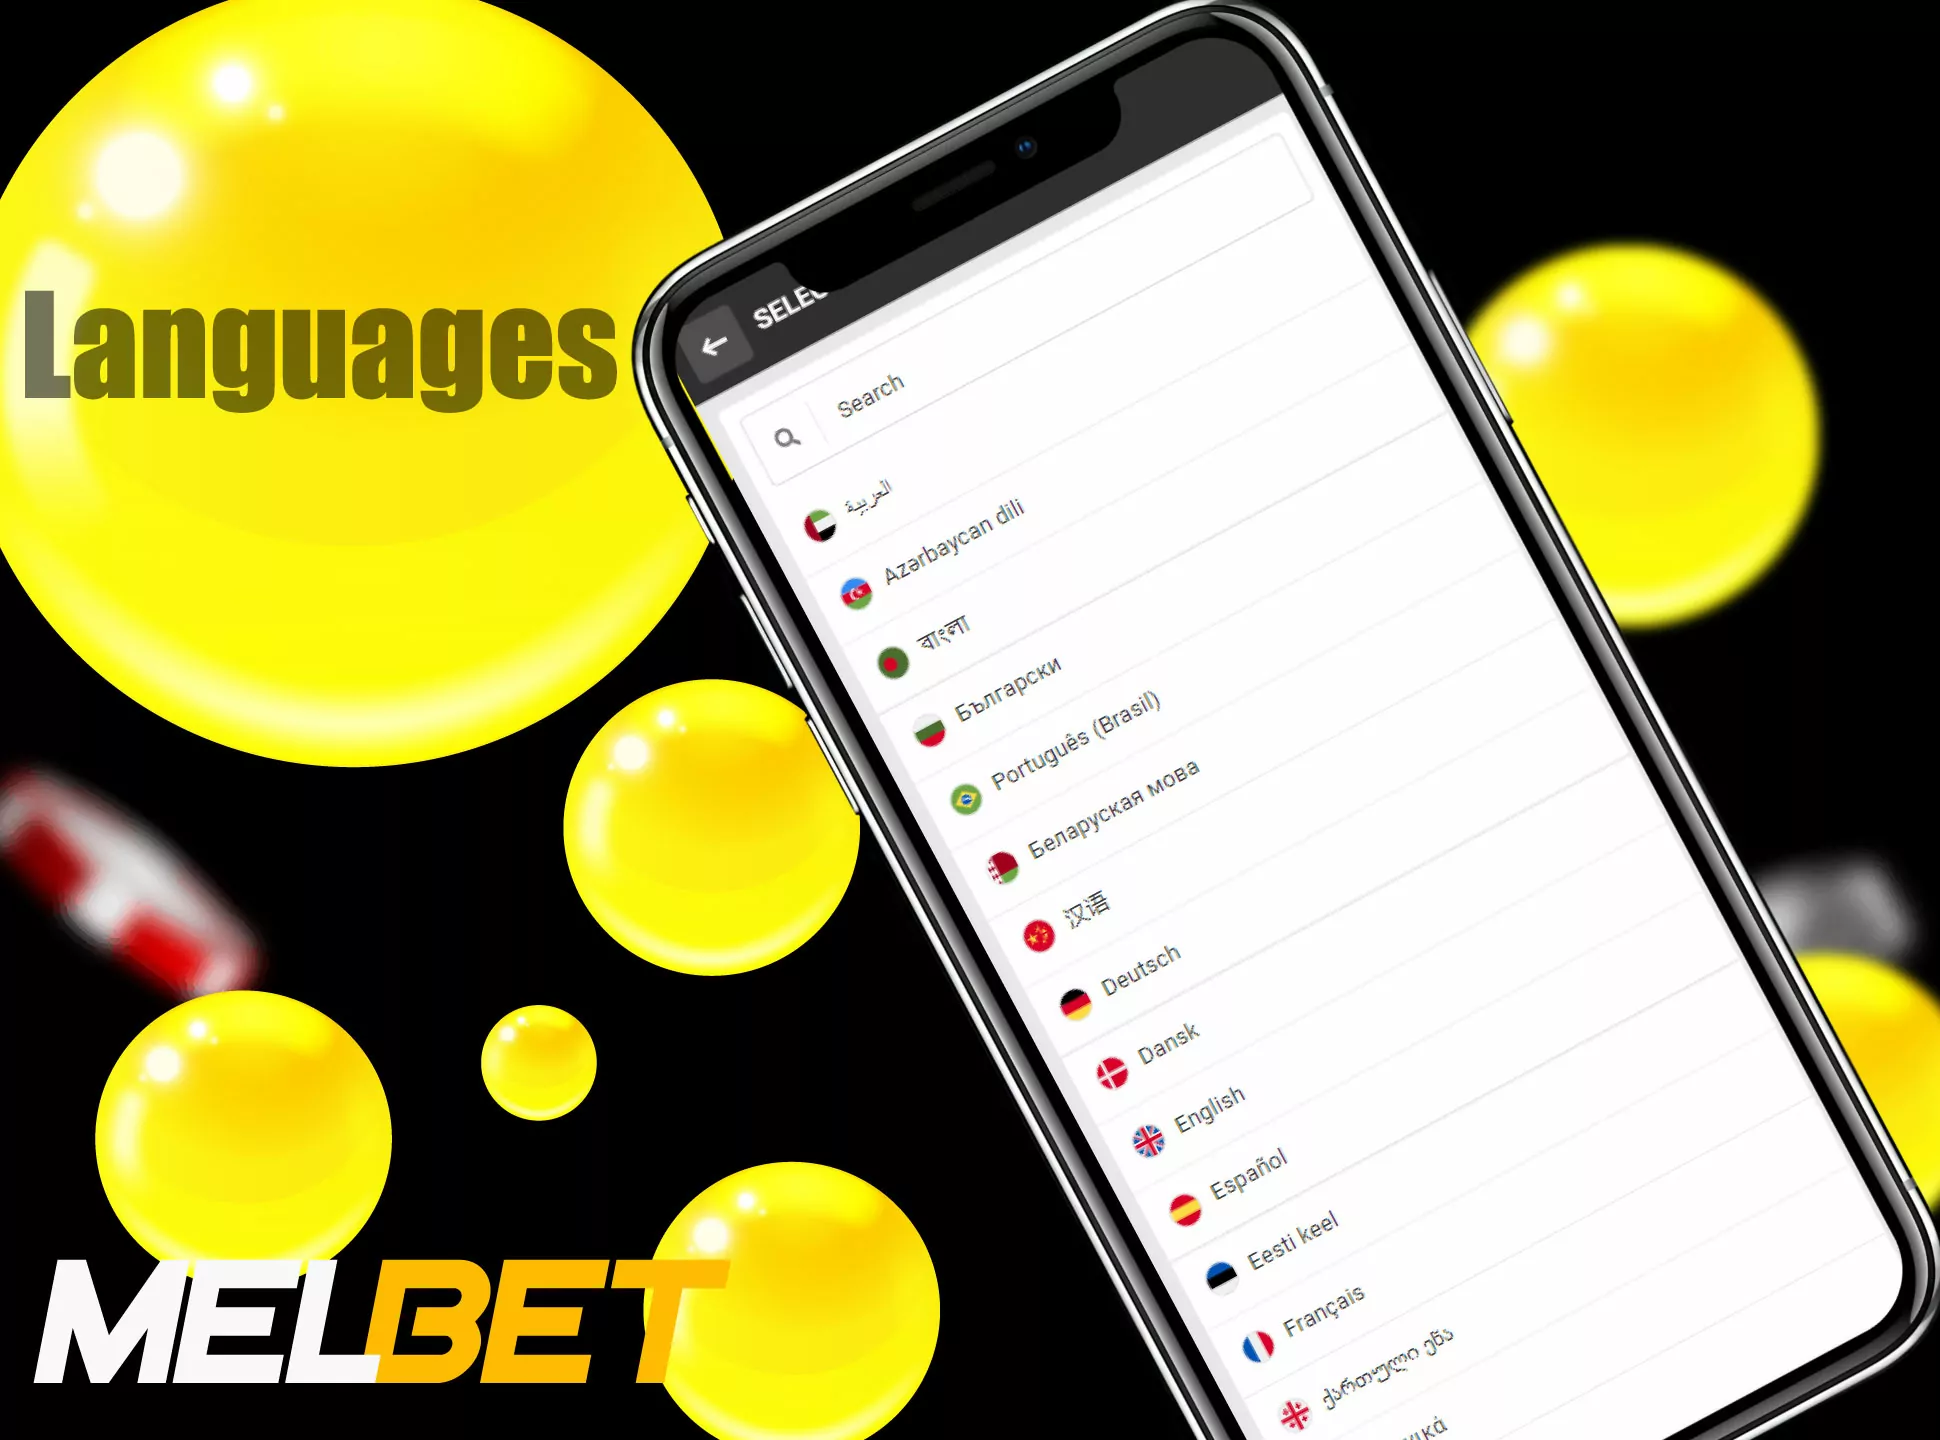 Select comfortable language for using the app.